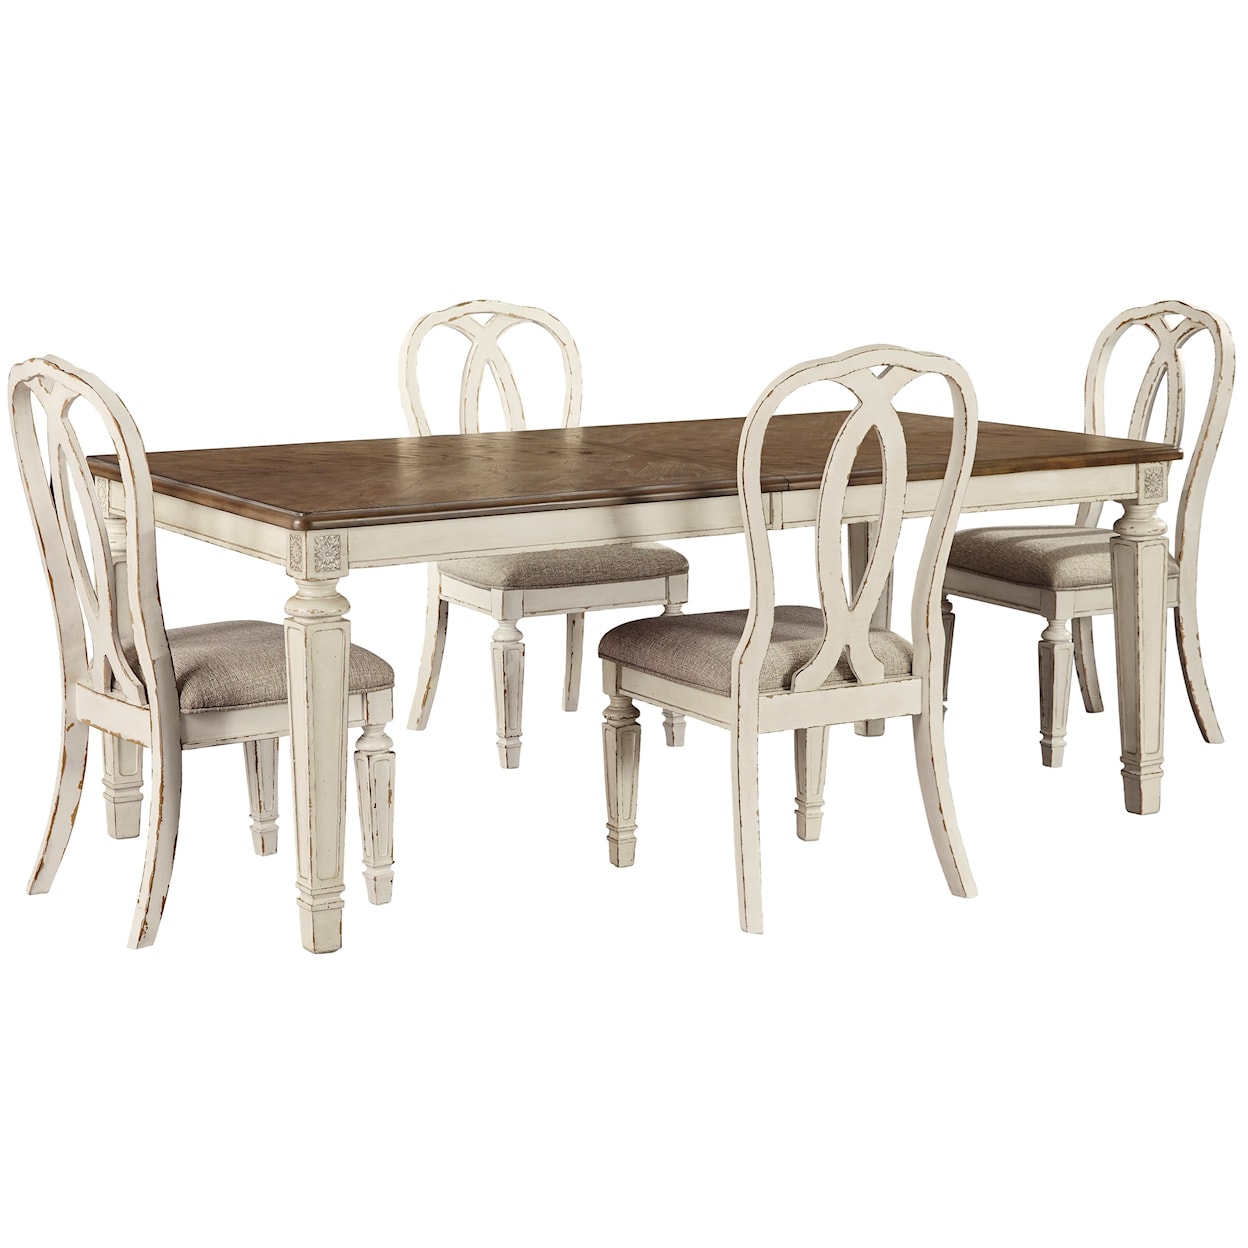 Ashley Signature Design Realyn 5-Piece Rectangular Table and Chair Set